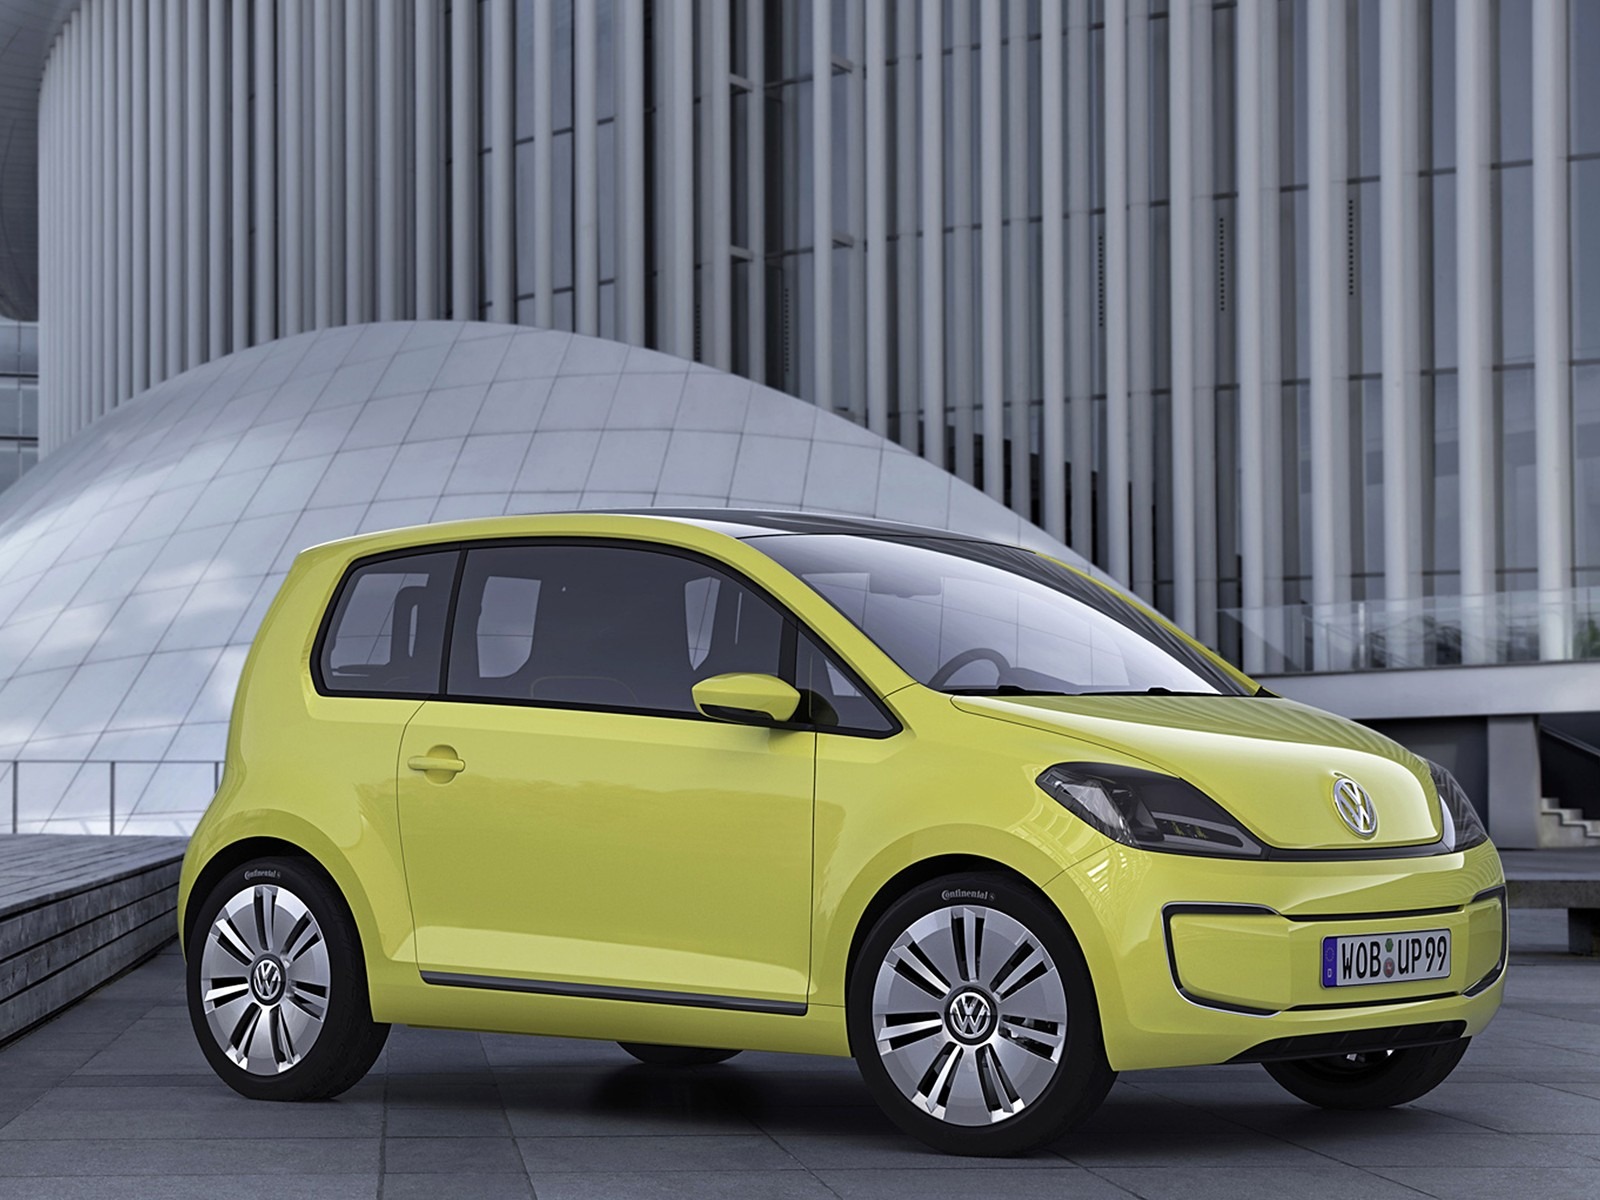 Volkswagen Concept Car tapety (2) #15 - 1600x1200